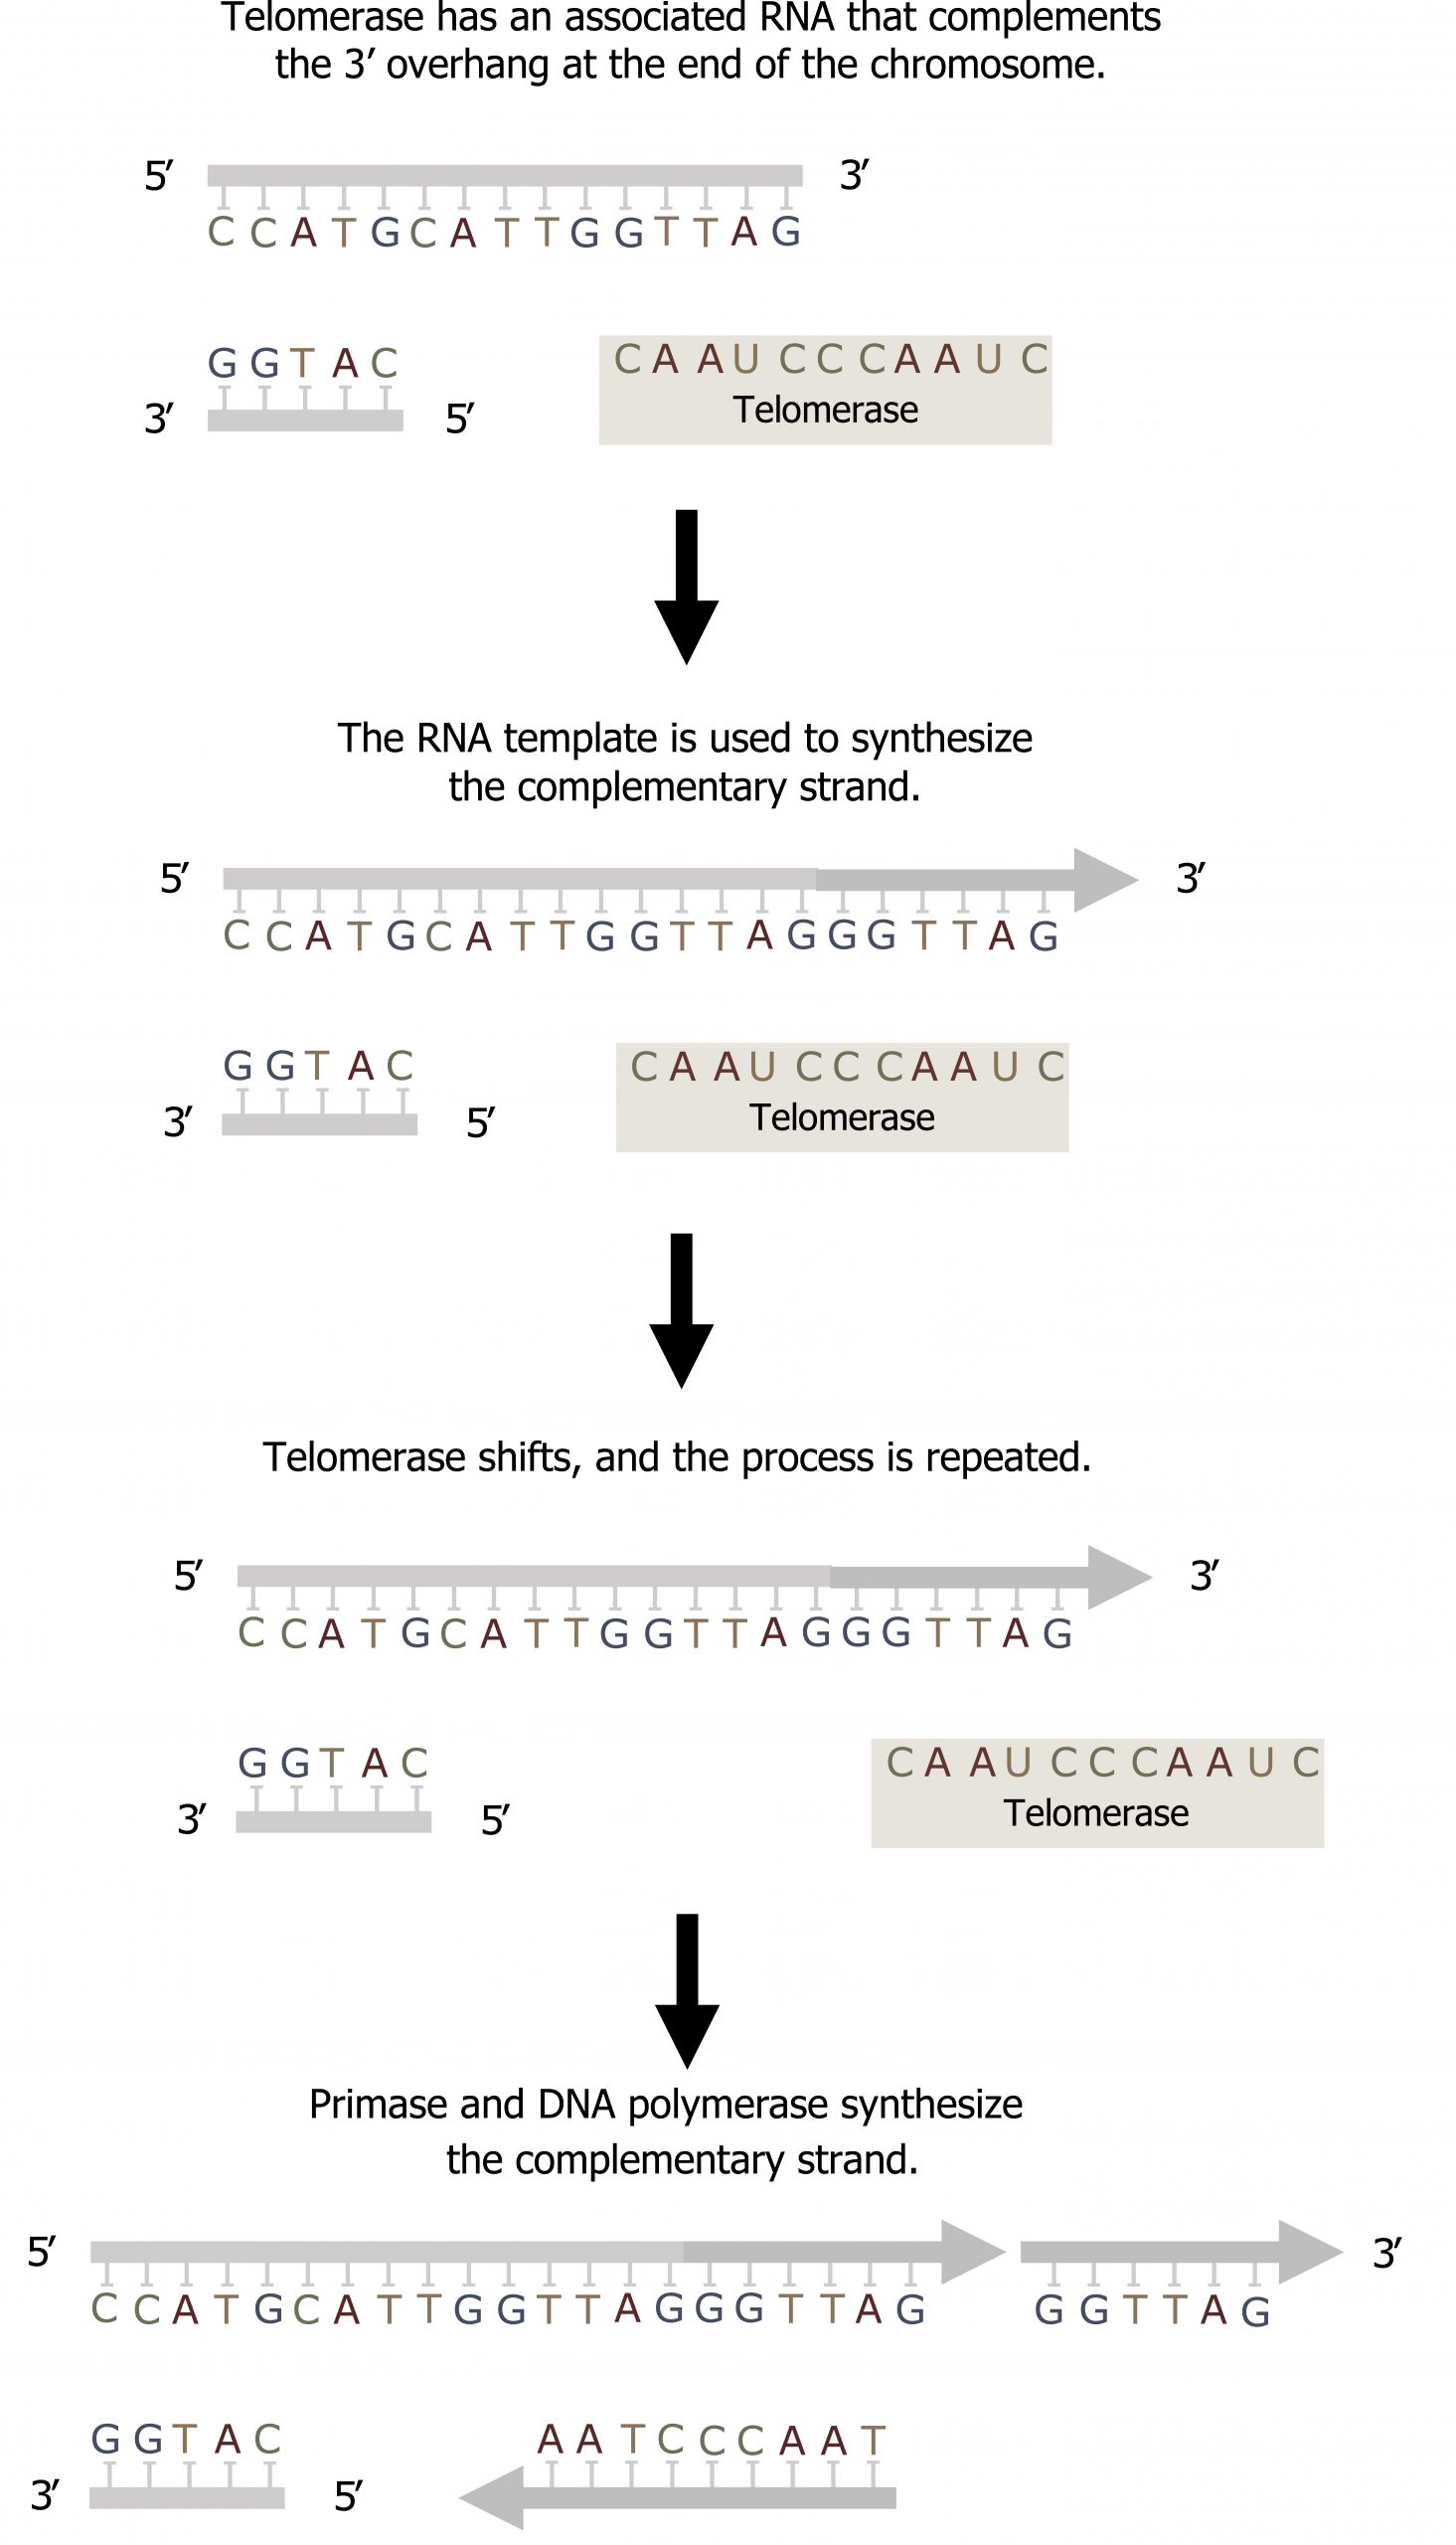 5’ to 3’ top strand with 3’ to 5’ bottom strand half as long. Telomerase has an associated RNA that complements the 3’ overhang at the end of the chromosome. The RNA template is used to synthesize the complementary strand. Additional bases are added to the 3’ end of the top strand. Telomerase shifts, and the process is repeated. Primase and DNA polymerase synthesize the complementary strand to the new bases.